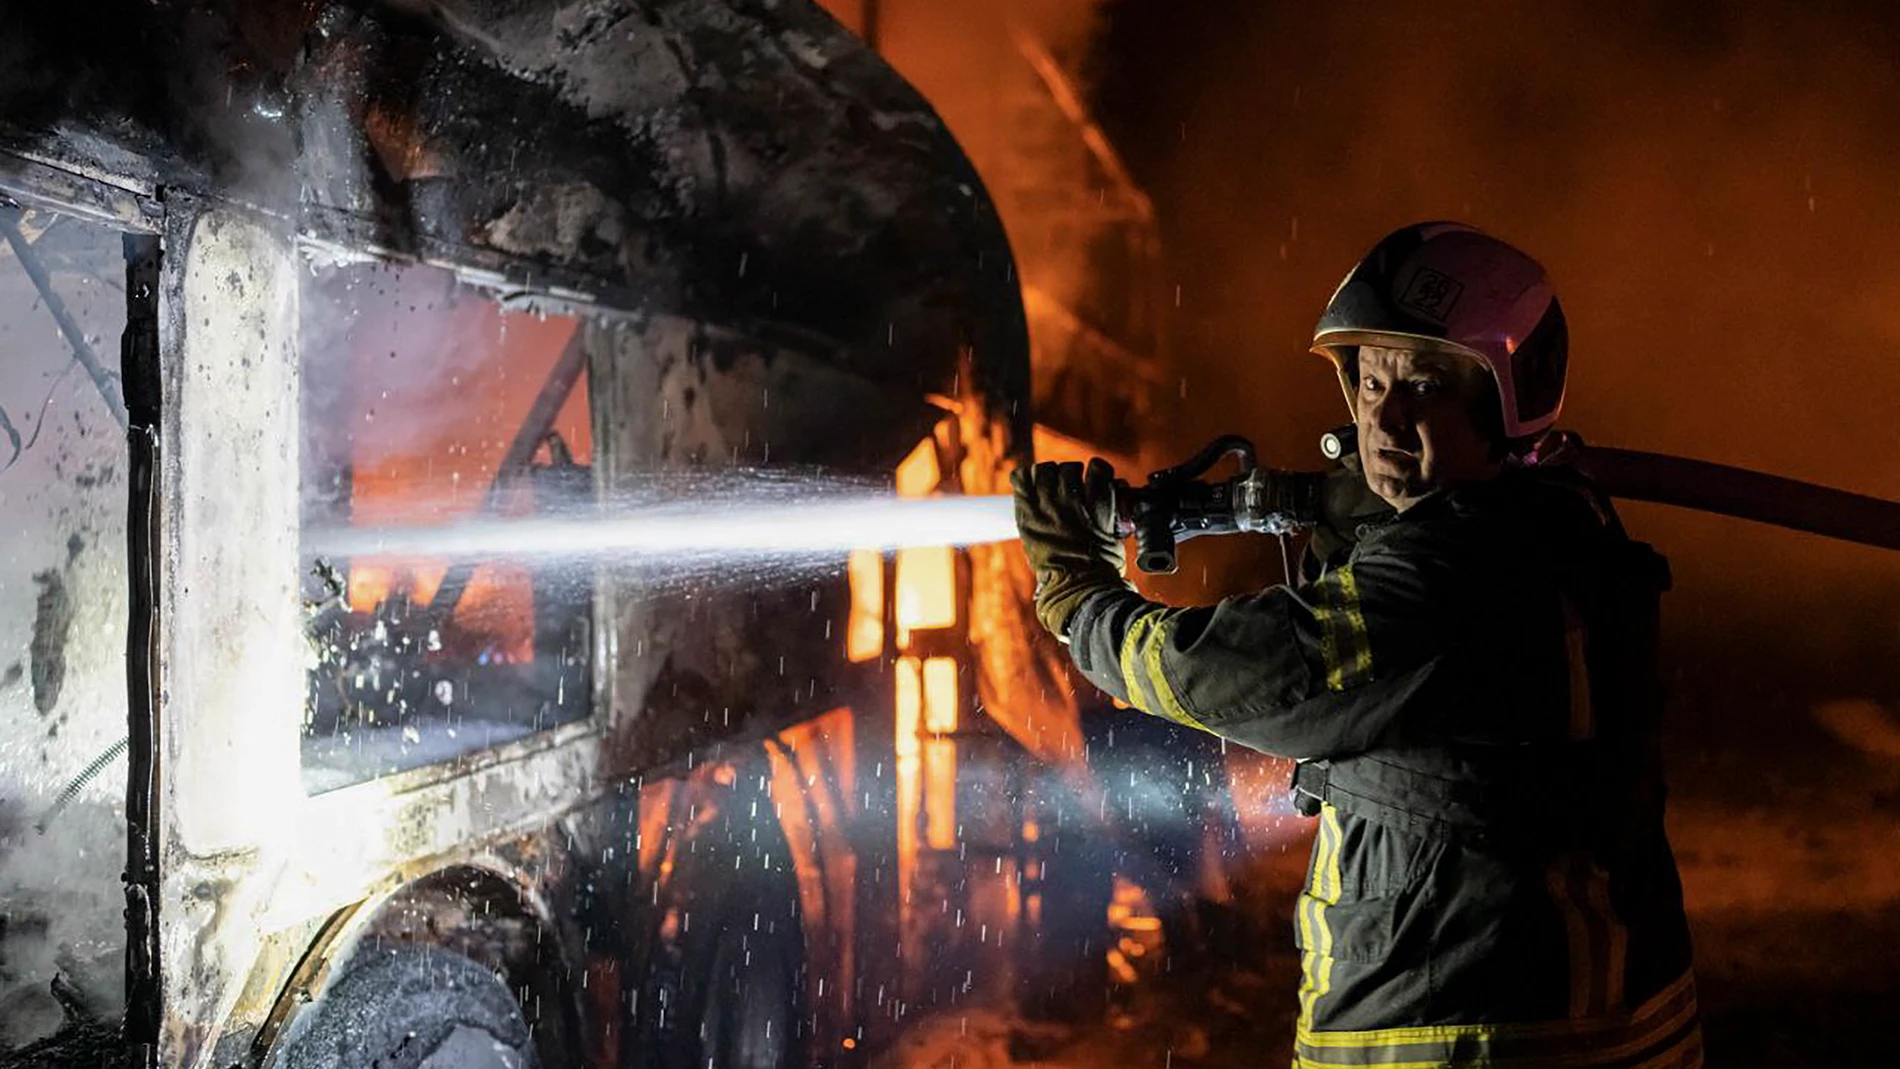 Kyiv (Ukraine), 16/05/2023.- A handout photo released by the press service of the State Emergency Service (SES) of Ukraine shows rescuers putting out a fire following a rocket attack, in Kyiv (Kiev), Ukraine, 16 May 2023, amid Russia's invasion. According to Yuriy Ignat, the speaker of the Air Force of the Armed Forces of Ukraine, Russian forces launched attacks on Ukraine with 18 missiles of various types, adding that all the 18 missiles were destroyed. According to the Kyiv Regional Military Administration, missile debris fell in Kyiv's Solomianskyi, Shevchenkivskyi, Sviatoshynskyi, Obolonskyi and Darnytskyi districts. Russian troops entered Ukrainian territory in February 2022, starting a conflict that has provoked destruction and a humanitarian crisis. (Atentado, Incendio, Rusia, Ucrania) EFE/EPA/STATE EMERGENCY SERVICE OF UKRAINE HANDOUT -- BEST QUALITY AVAILABLE -- MANDATORY CREDIT: STATE EMERGENCY SERVICE OF UKRAINE -- HANDOUT EDITORIAL USE ONLY/NO SALES
